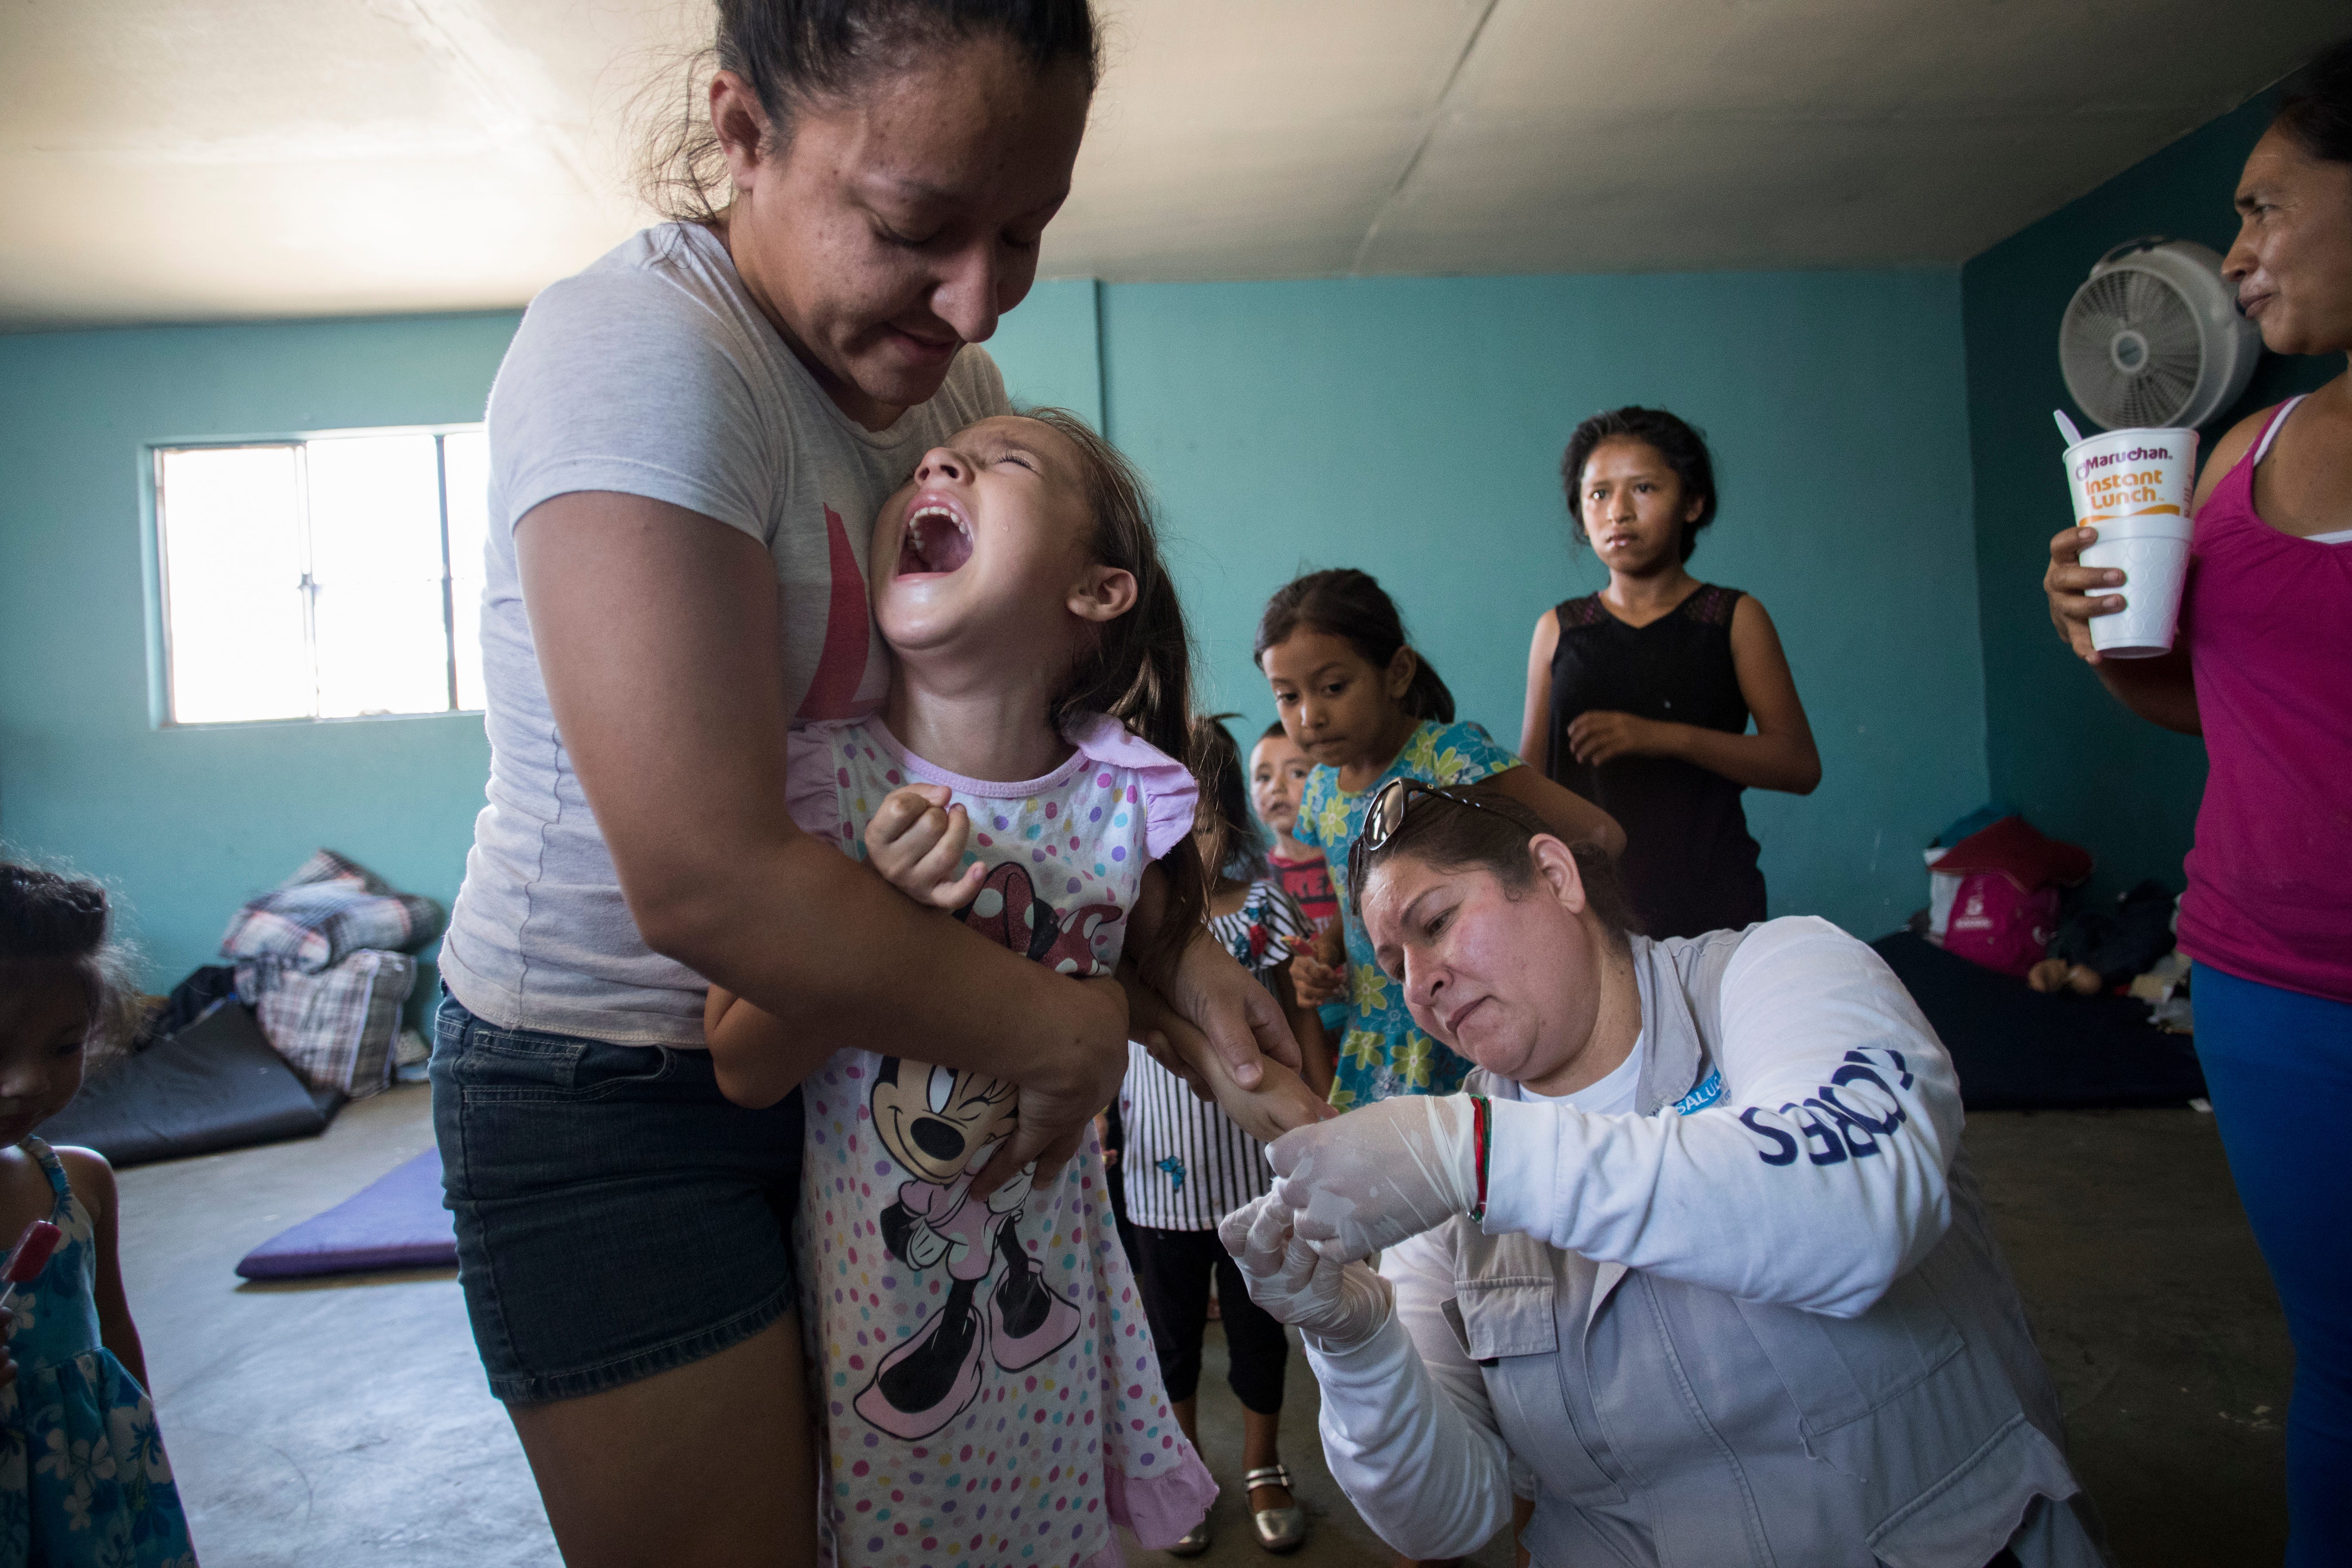 MEXICALI, Mexico – Marisela Lopez, 28, holds her 6-year-old daughter, Maritza Salazar Lopez, as Andrea Delgado with the Baja California state health ministry draws blood from her finger on June 24, 2019. Delgado was testing for malaria at the migrant shelter Casa de Ayuda Alfa y Omega.